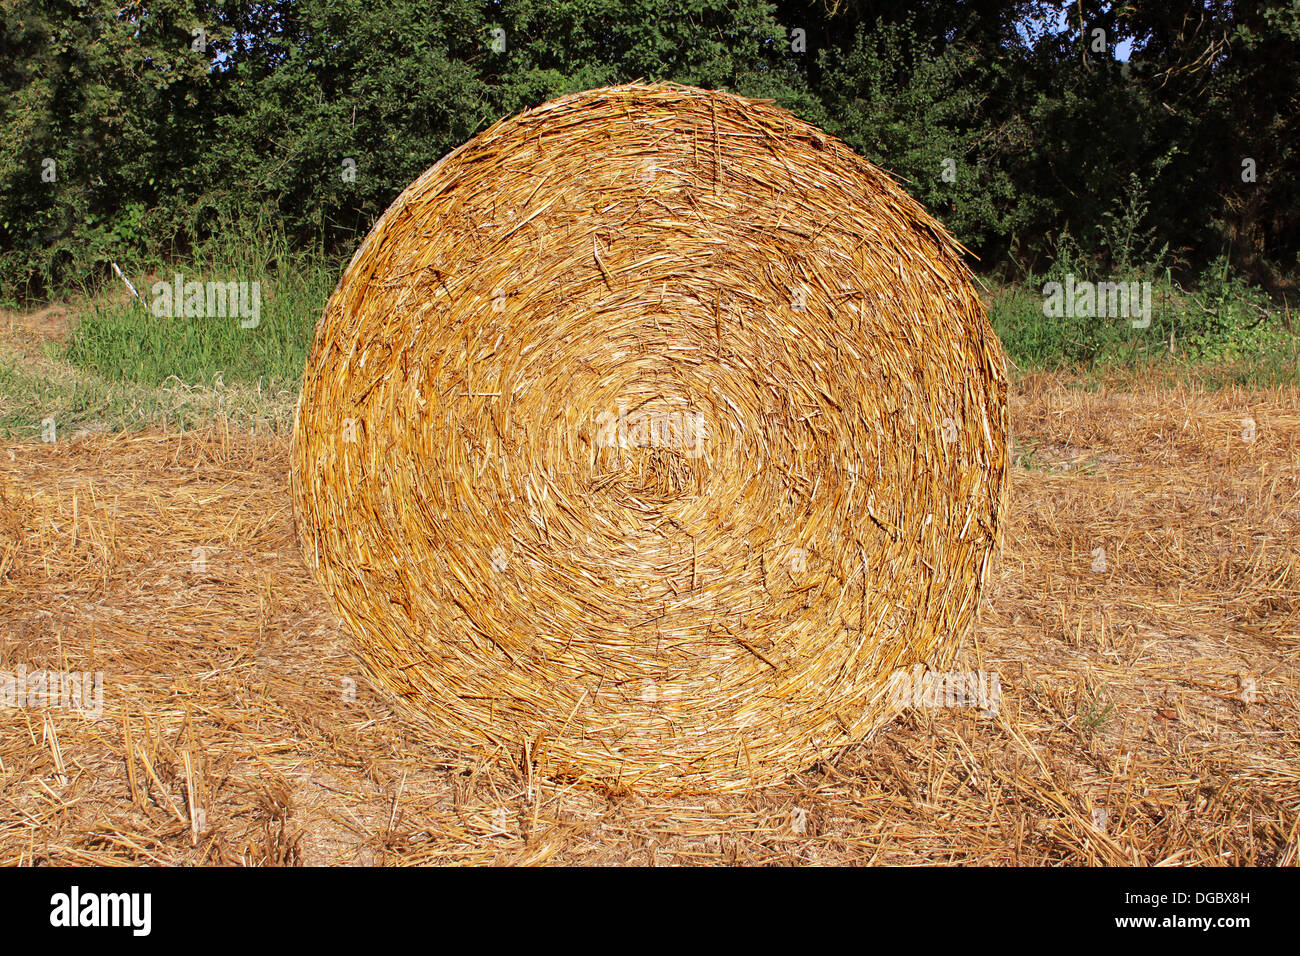 a stack of straw in a field of growing wheat crop Stock Photo